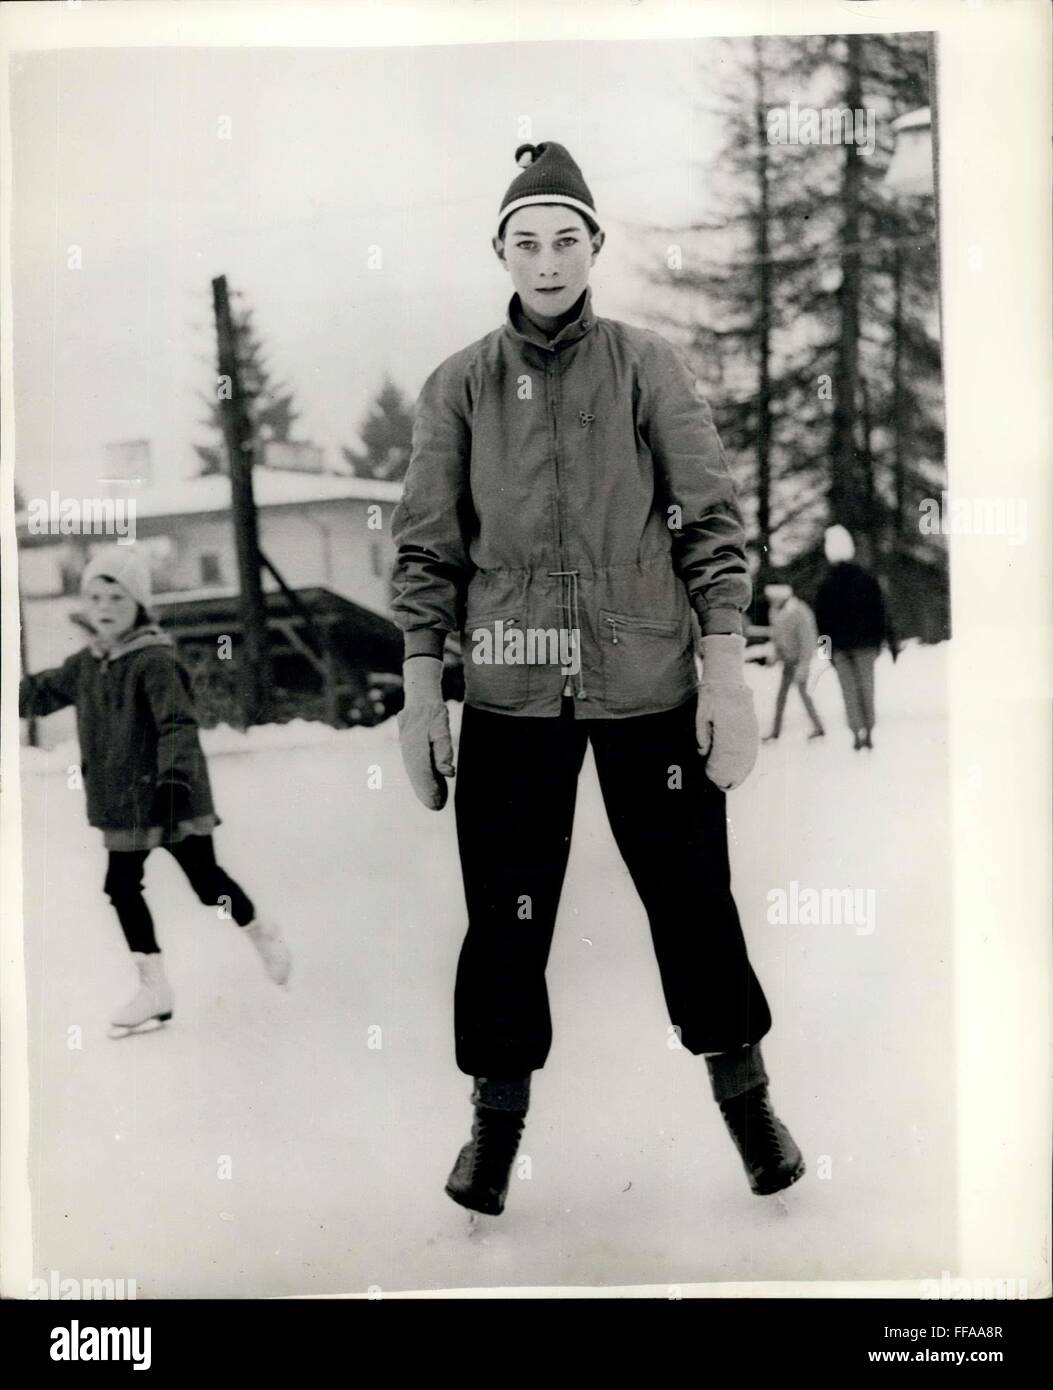 1956 - Prince William of Gloucester Prince William on holiday in Kitzbuhel. Keystone Photo Shows: Prince William, 15, the elder son of the Duke and Duchess of Gloucester, seen out skating at Kitzbuhel, Austria, where he is on holiday. © Keystone Pictures USA/ZUMAPRESS.com/Alamy Live News Stock Photo